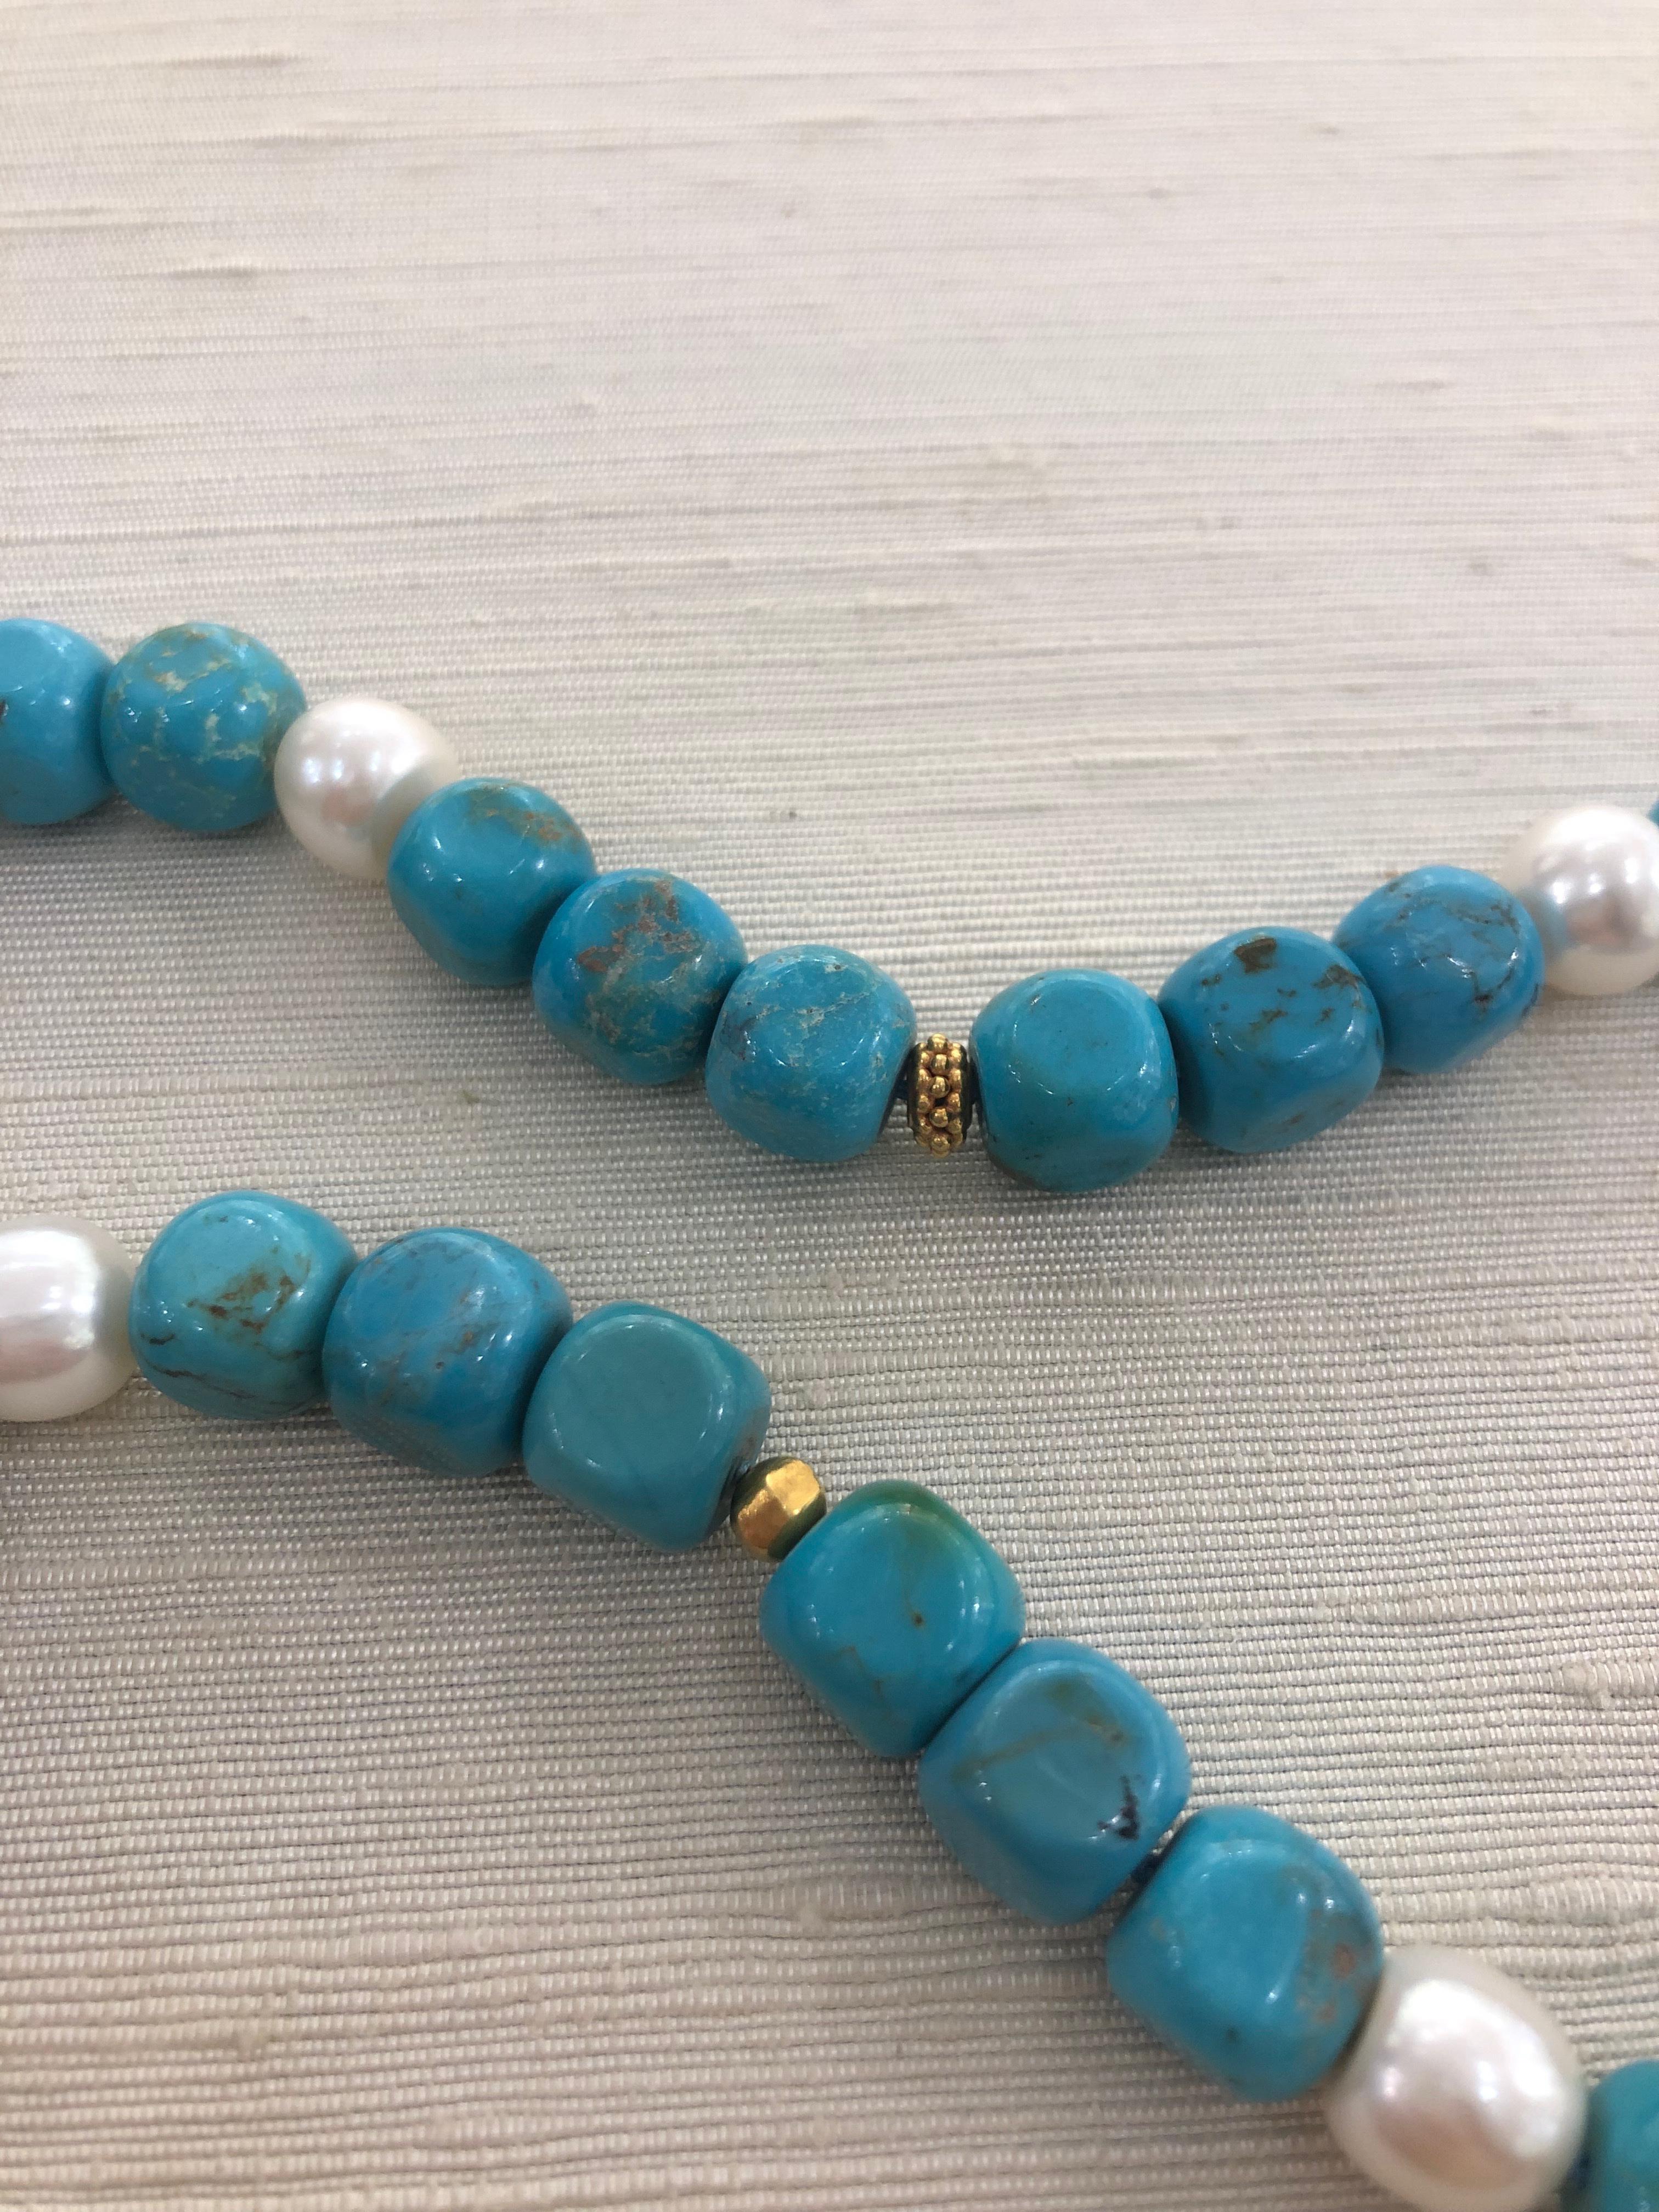 Contemporary Turquoise Necklace with Freshwater Pearls and 18 Karat Gold Beads